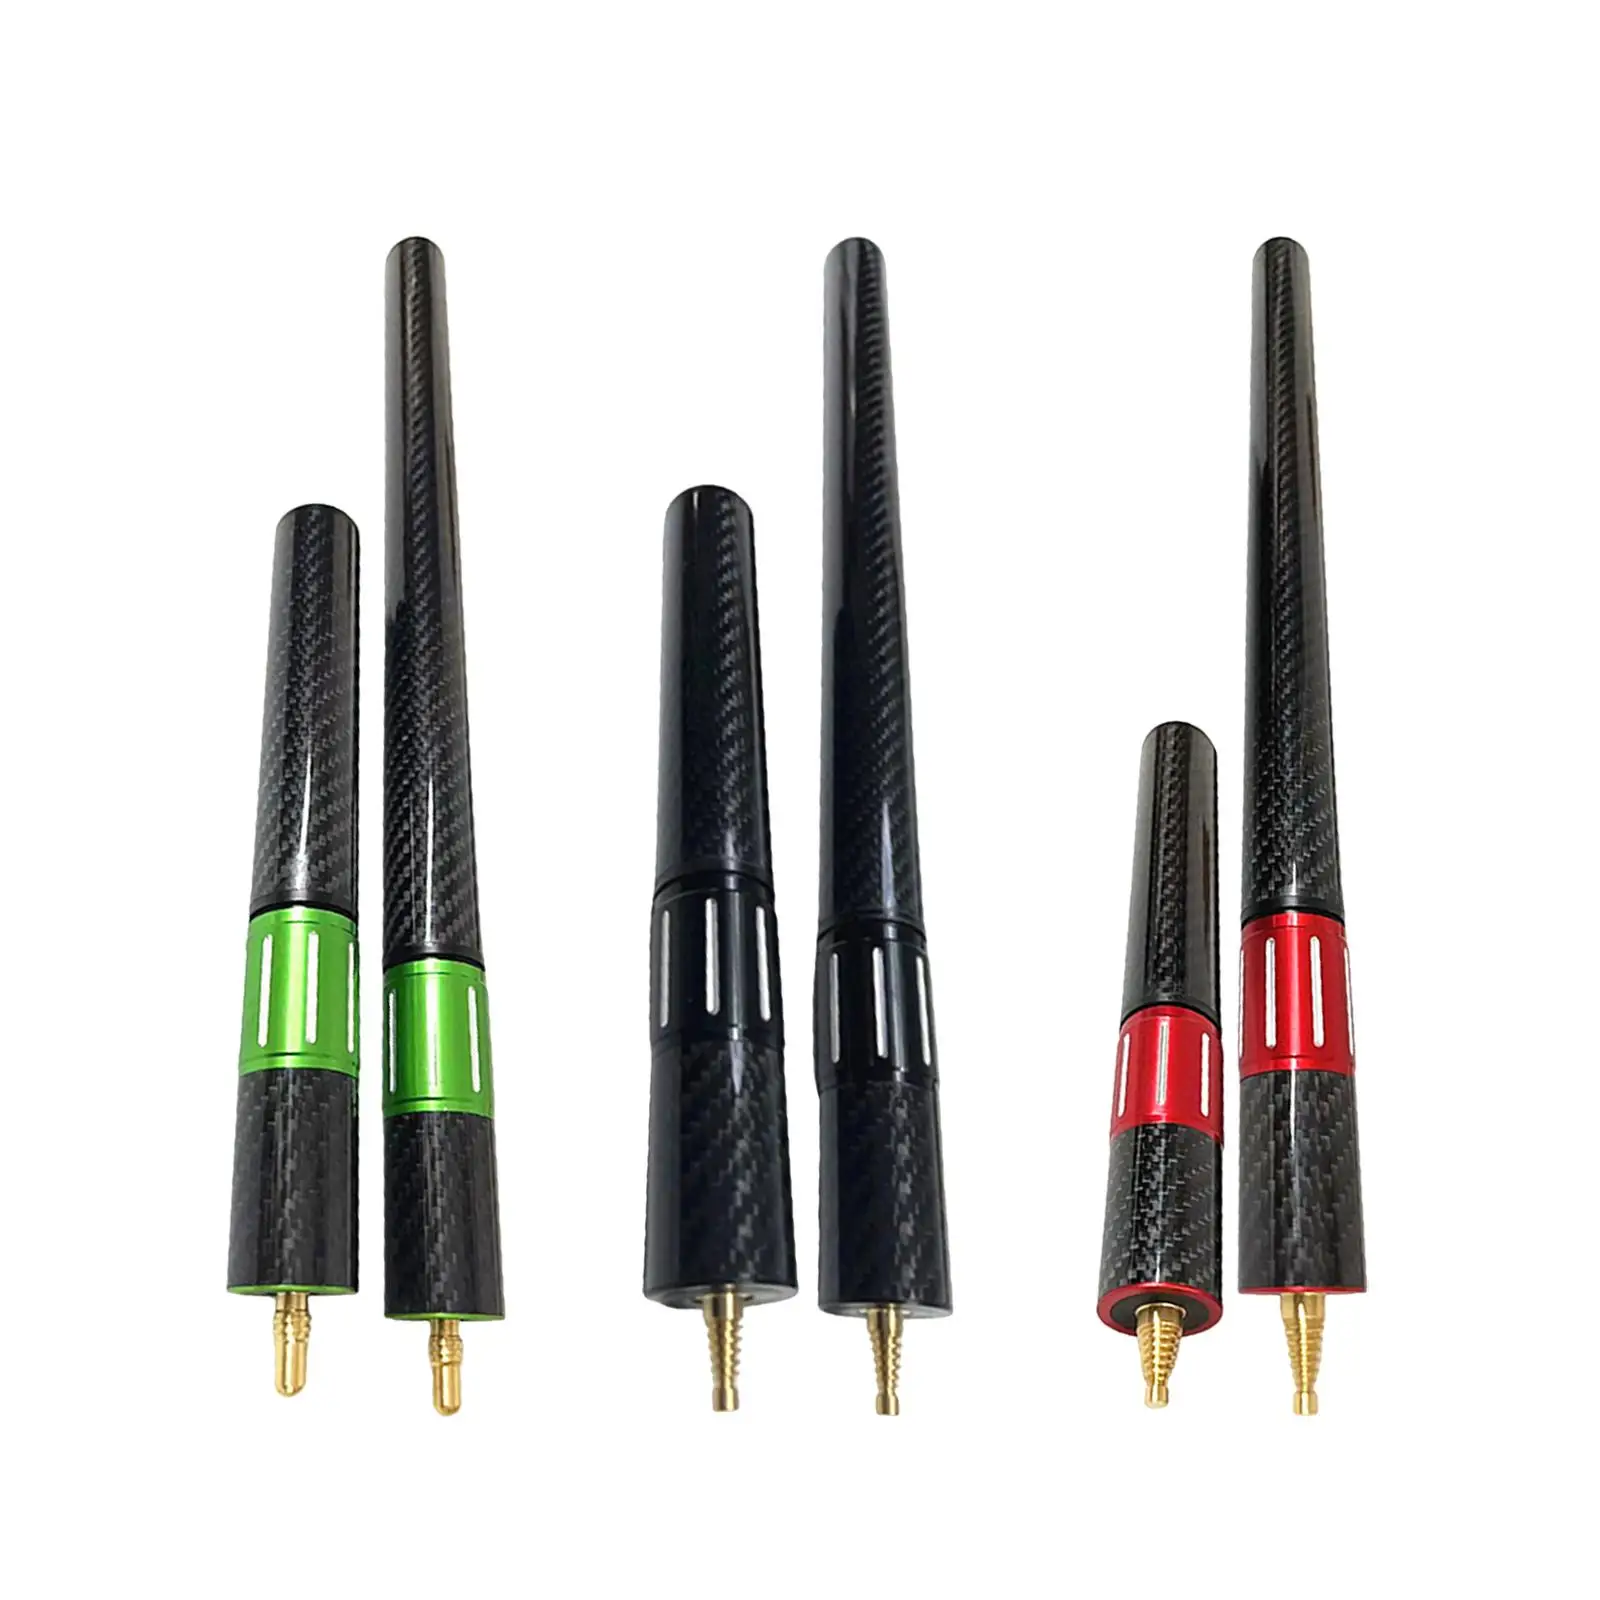 2x Telescopic Pool Cue Extender Billiards Cue Extension Tools Durable Snookers Cue Extension for Men Women Training Accessory